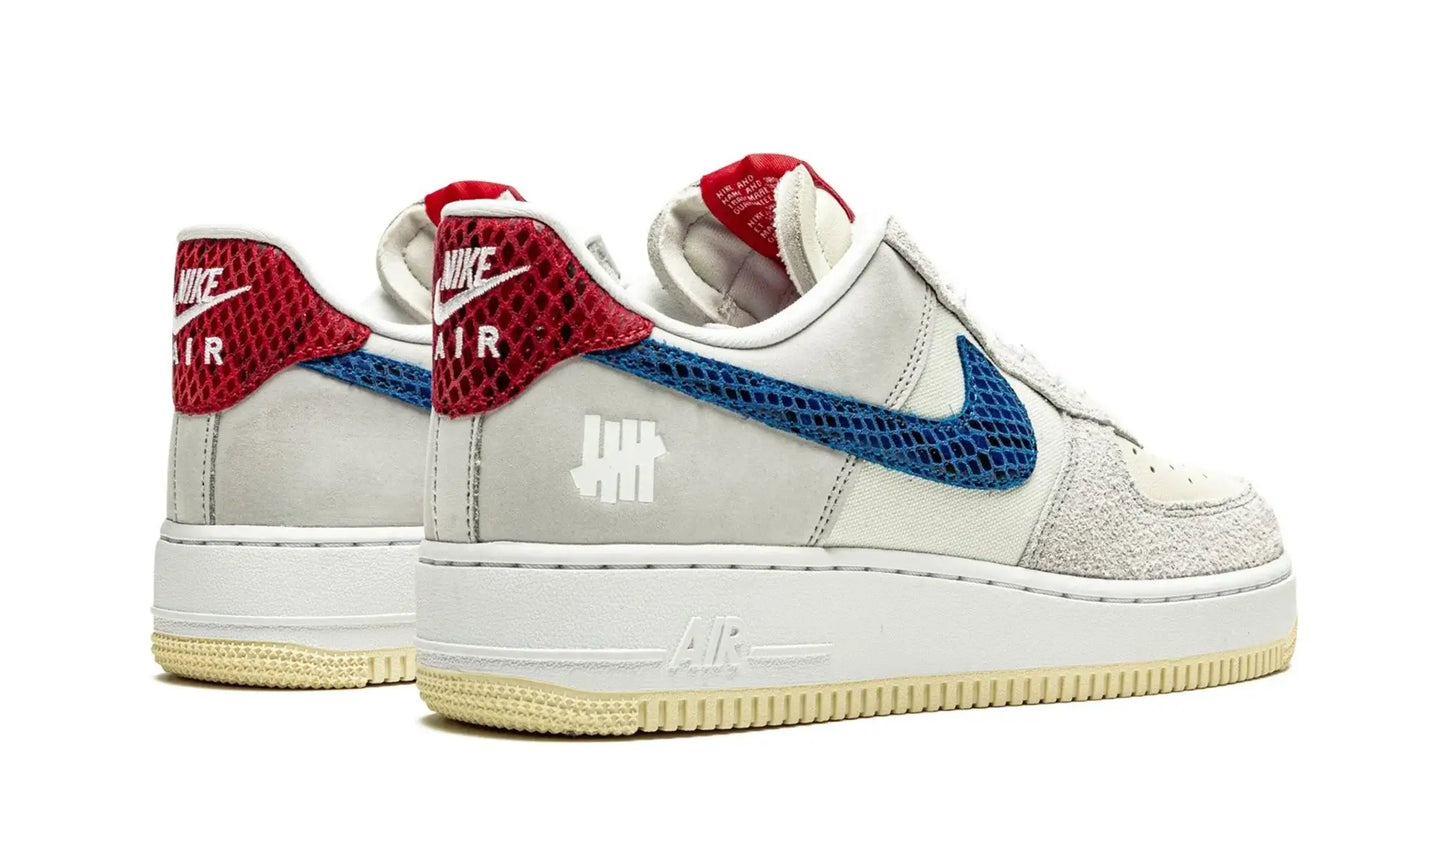 Tênis Air Force 1 x Undefeated "5 on it" Cinza